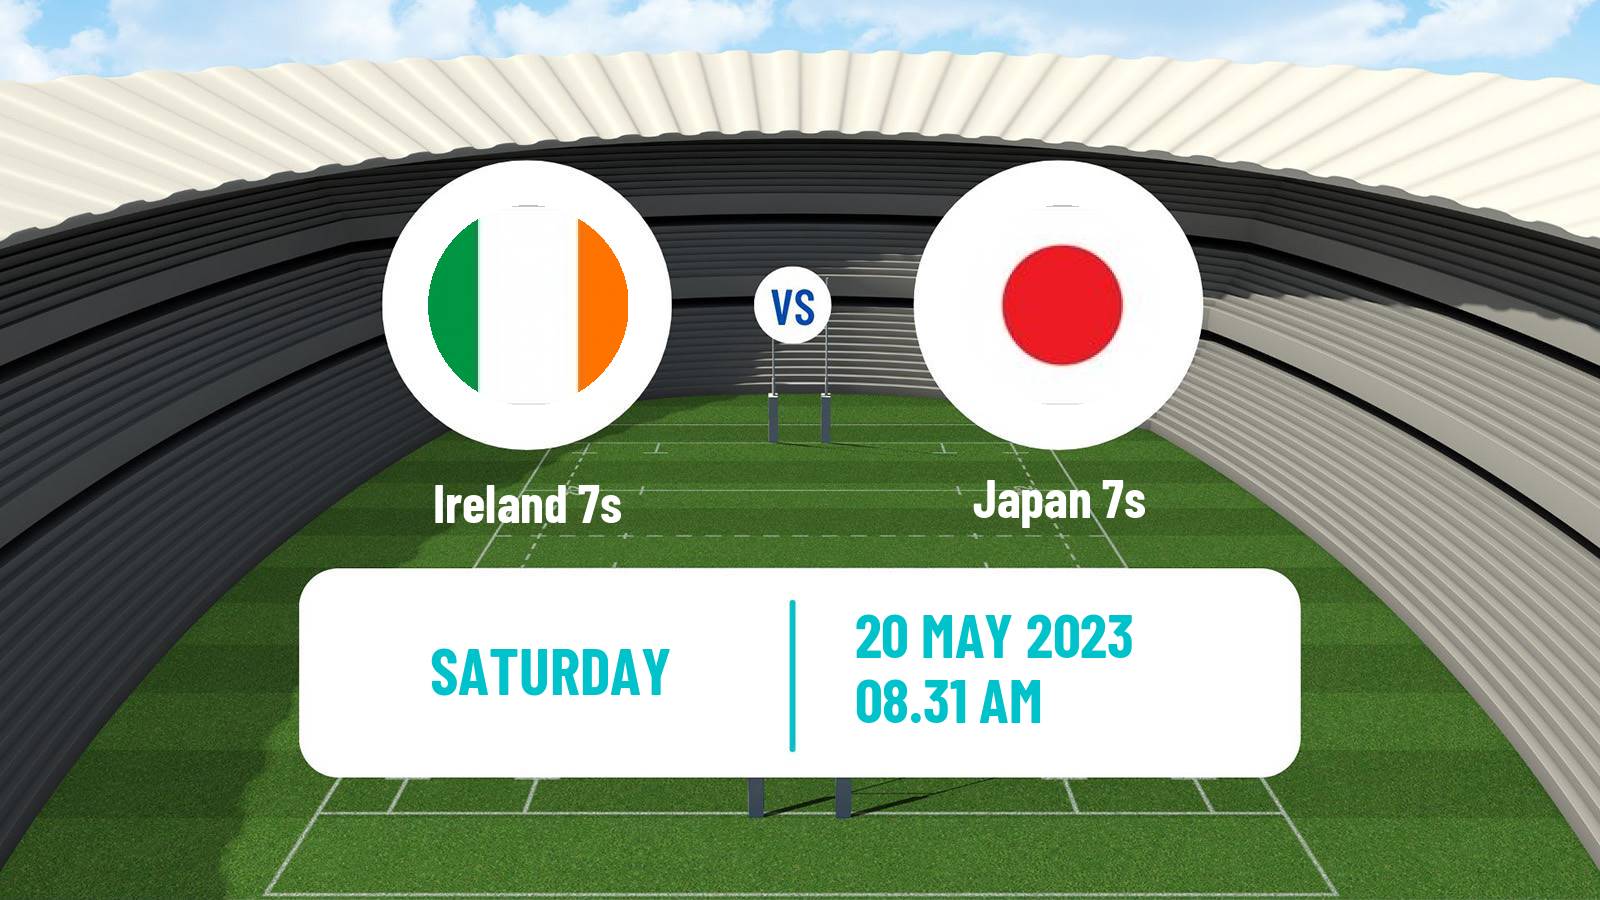 Rugby union Sevens World Series - England Ireland 7s - Japan 7s